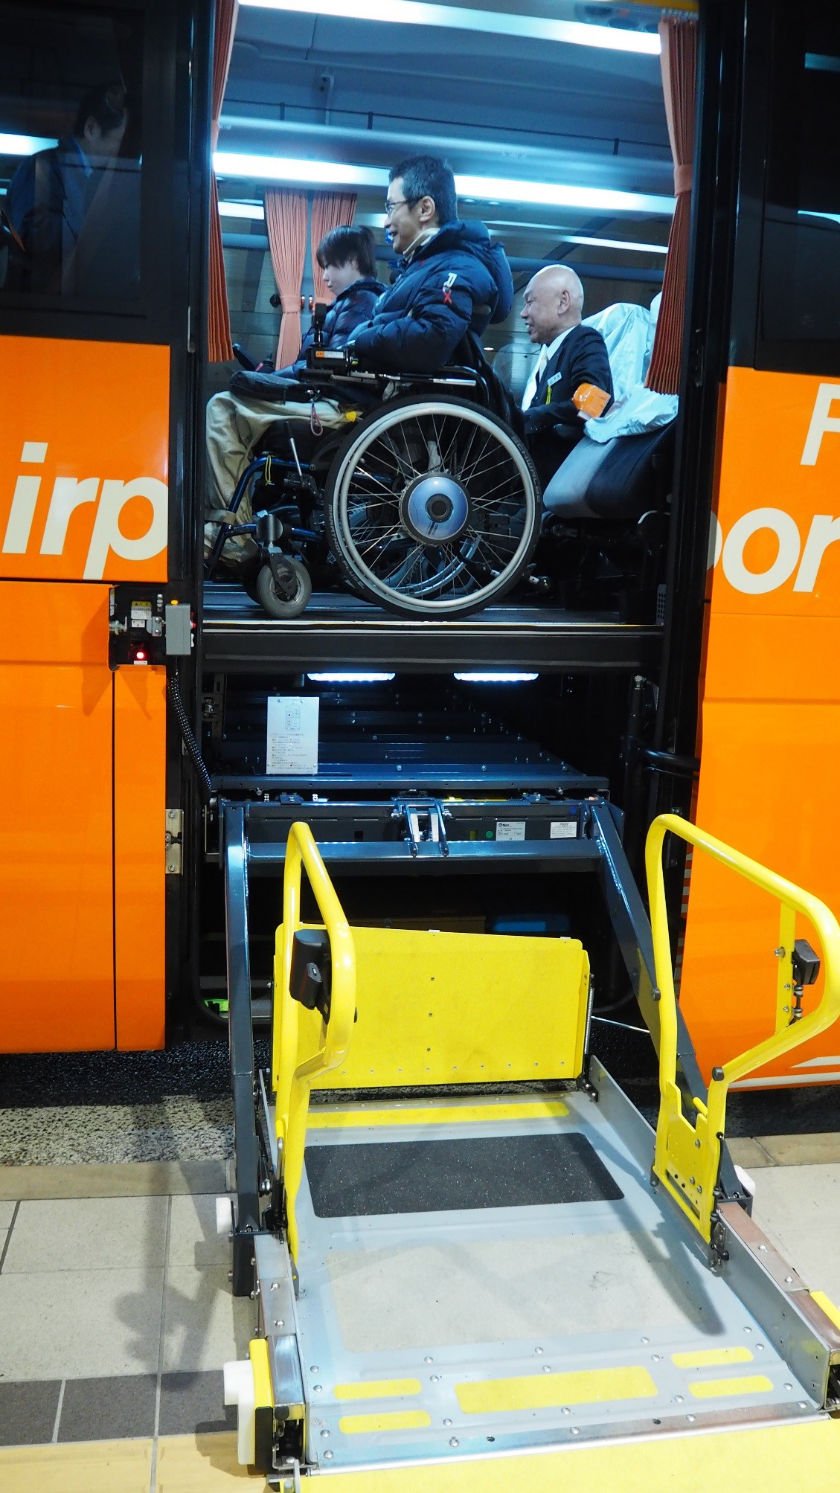 Wheelchair users in accessible airport bus